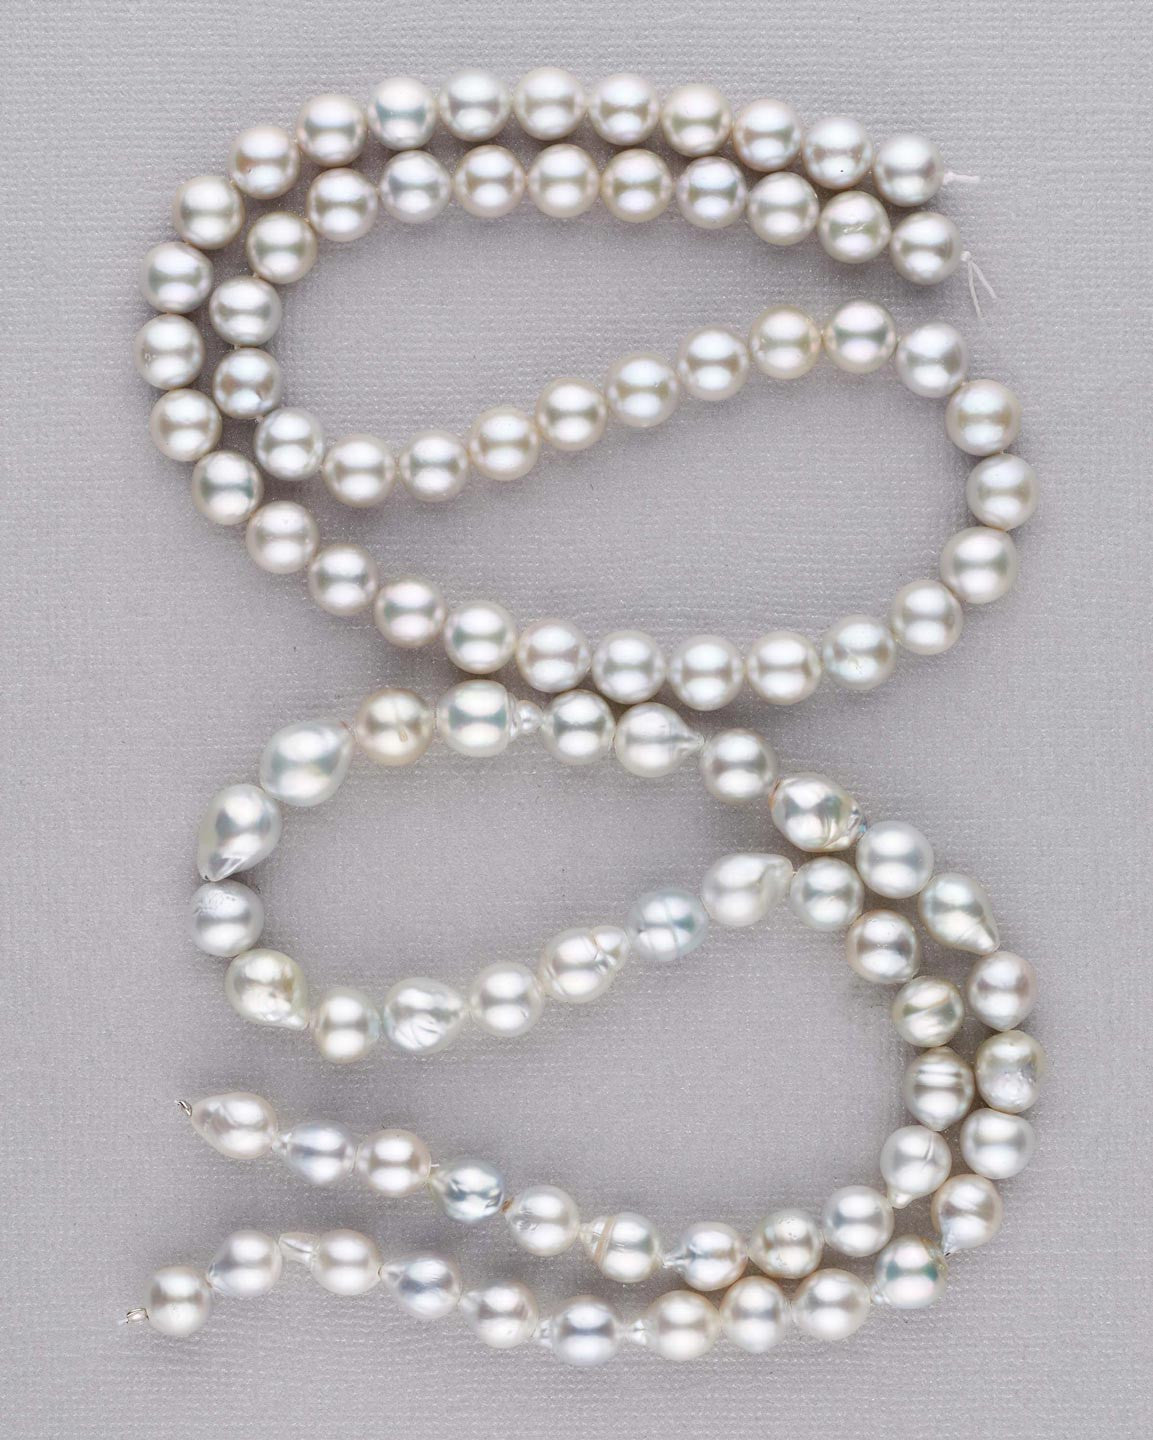 Red Sea Cultured Pearls: yes, they do exist – Pearl Paradise